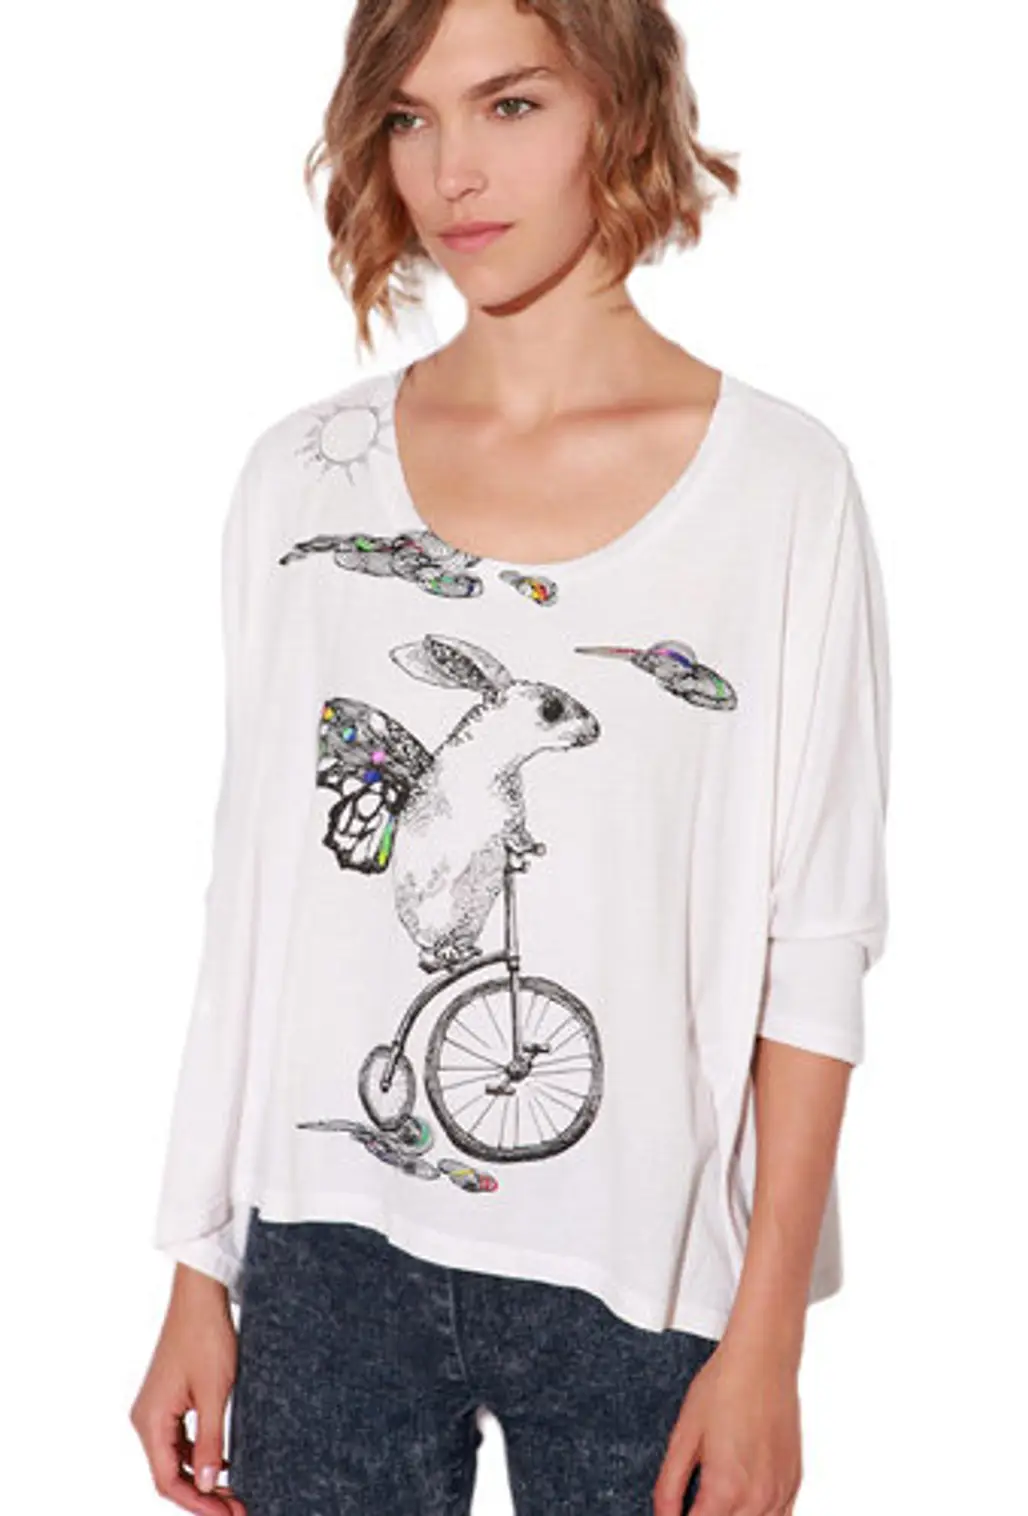 Truly Madly Deeply Bunny on Bike Cape Tee